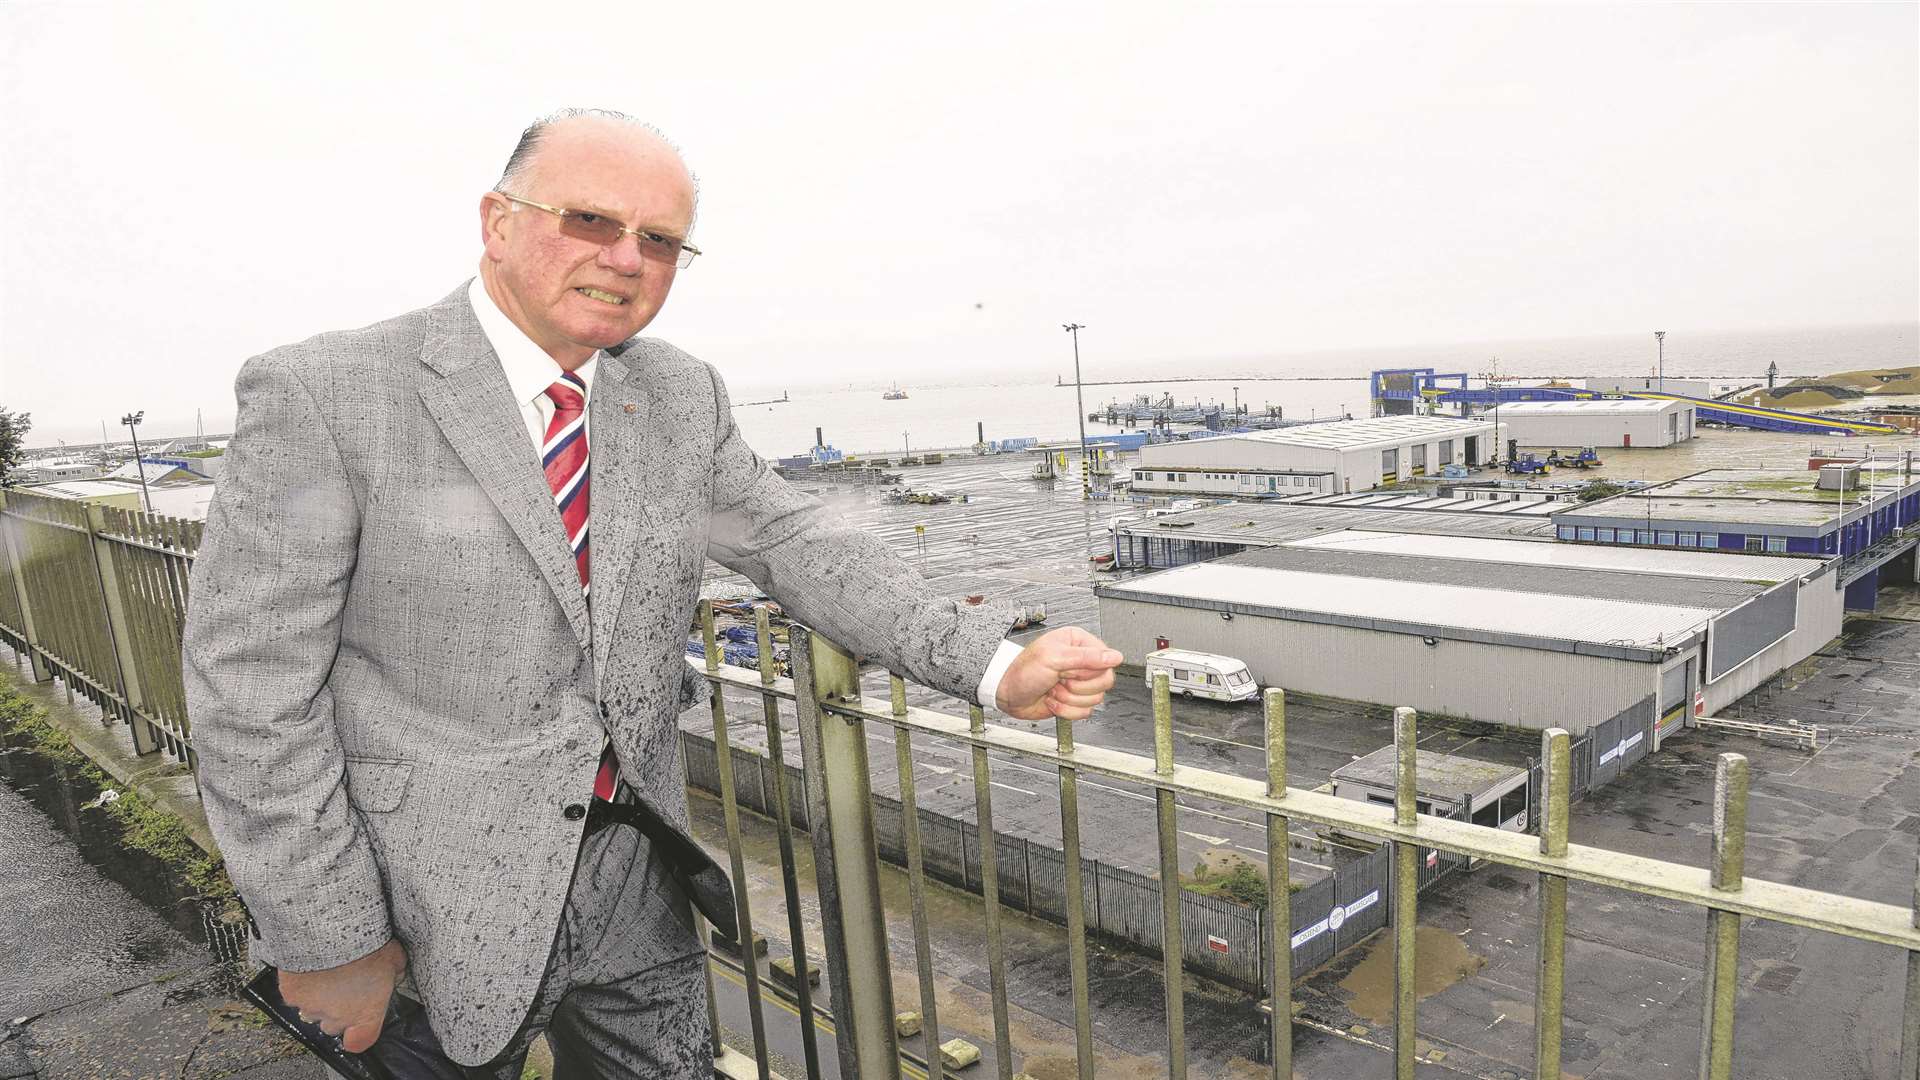 Bill Moses wants to restart passenger ferry services from Ramsgate. Picture: Chris Davey